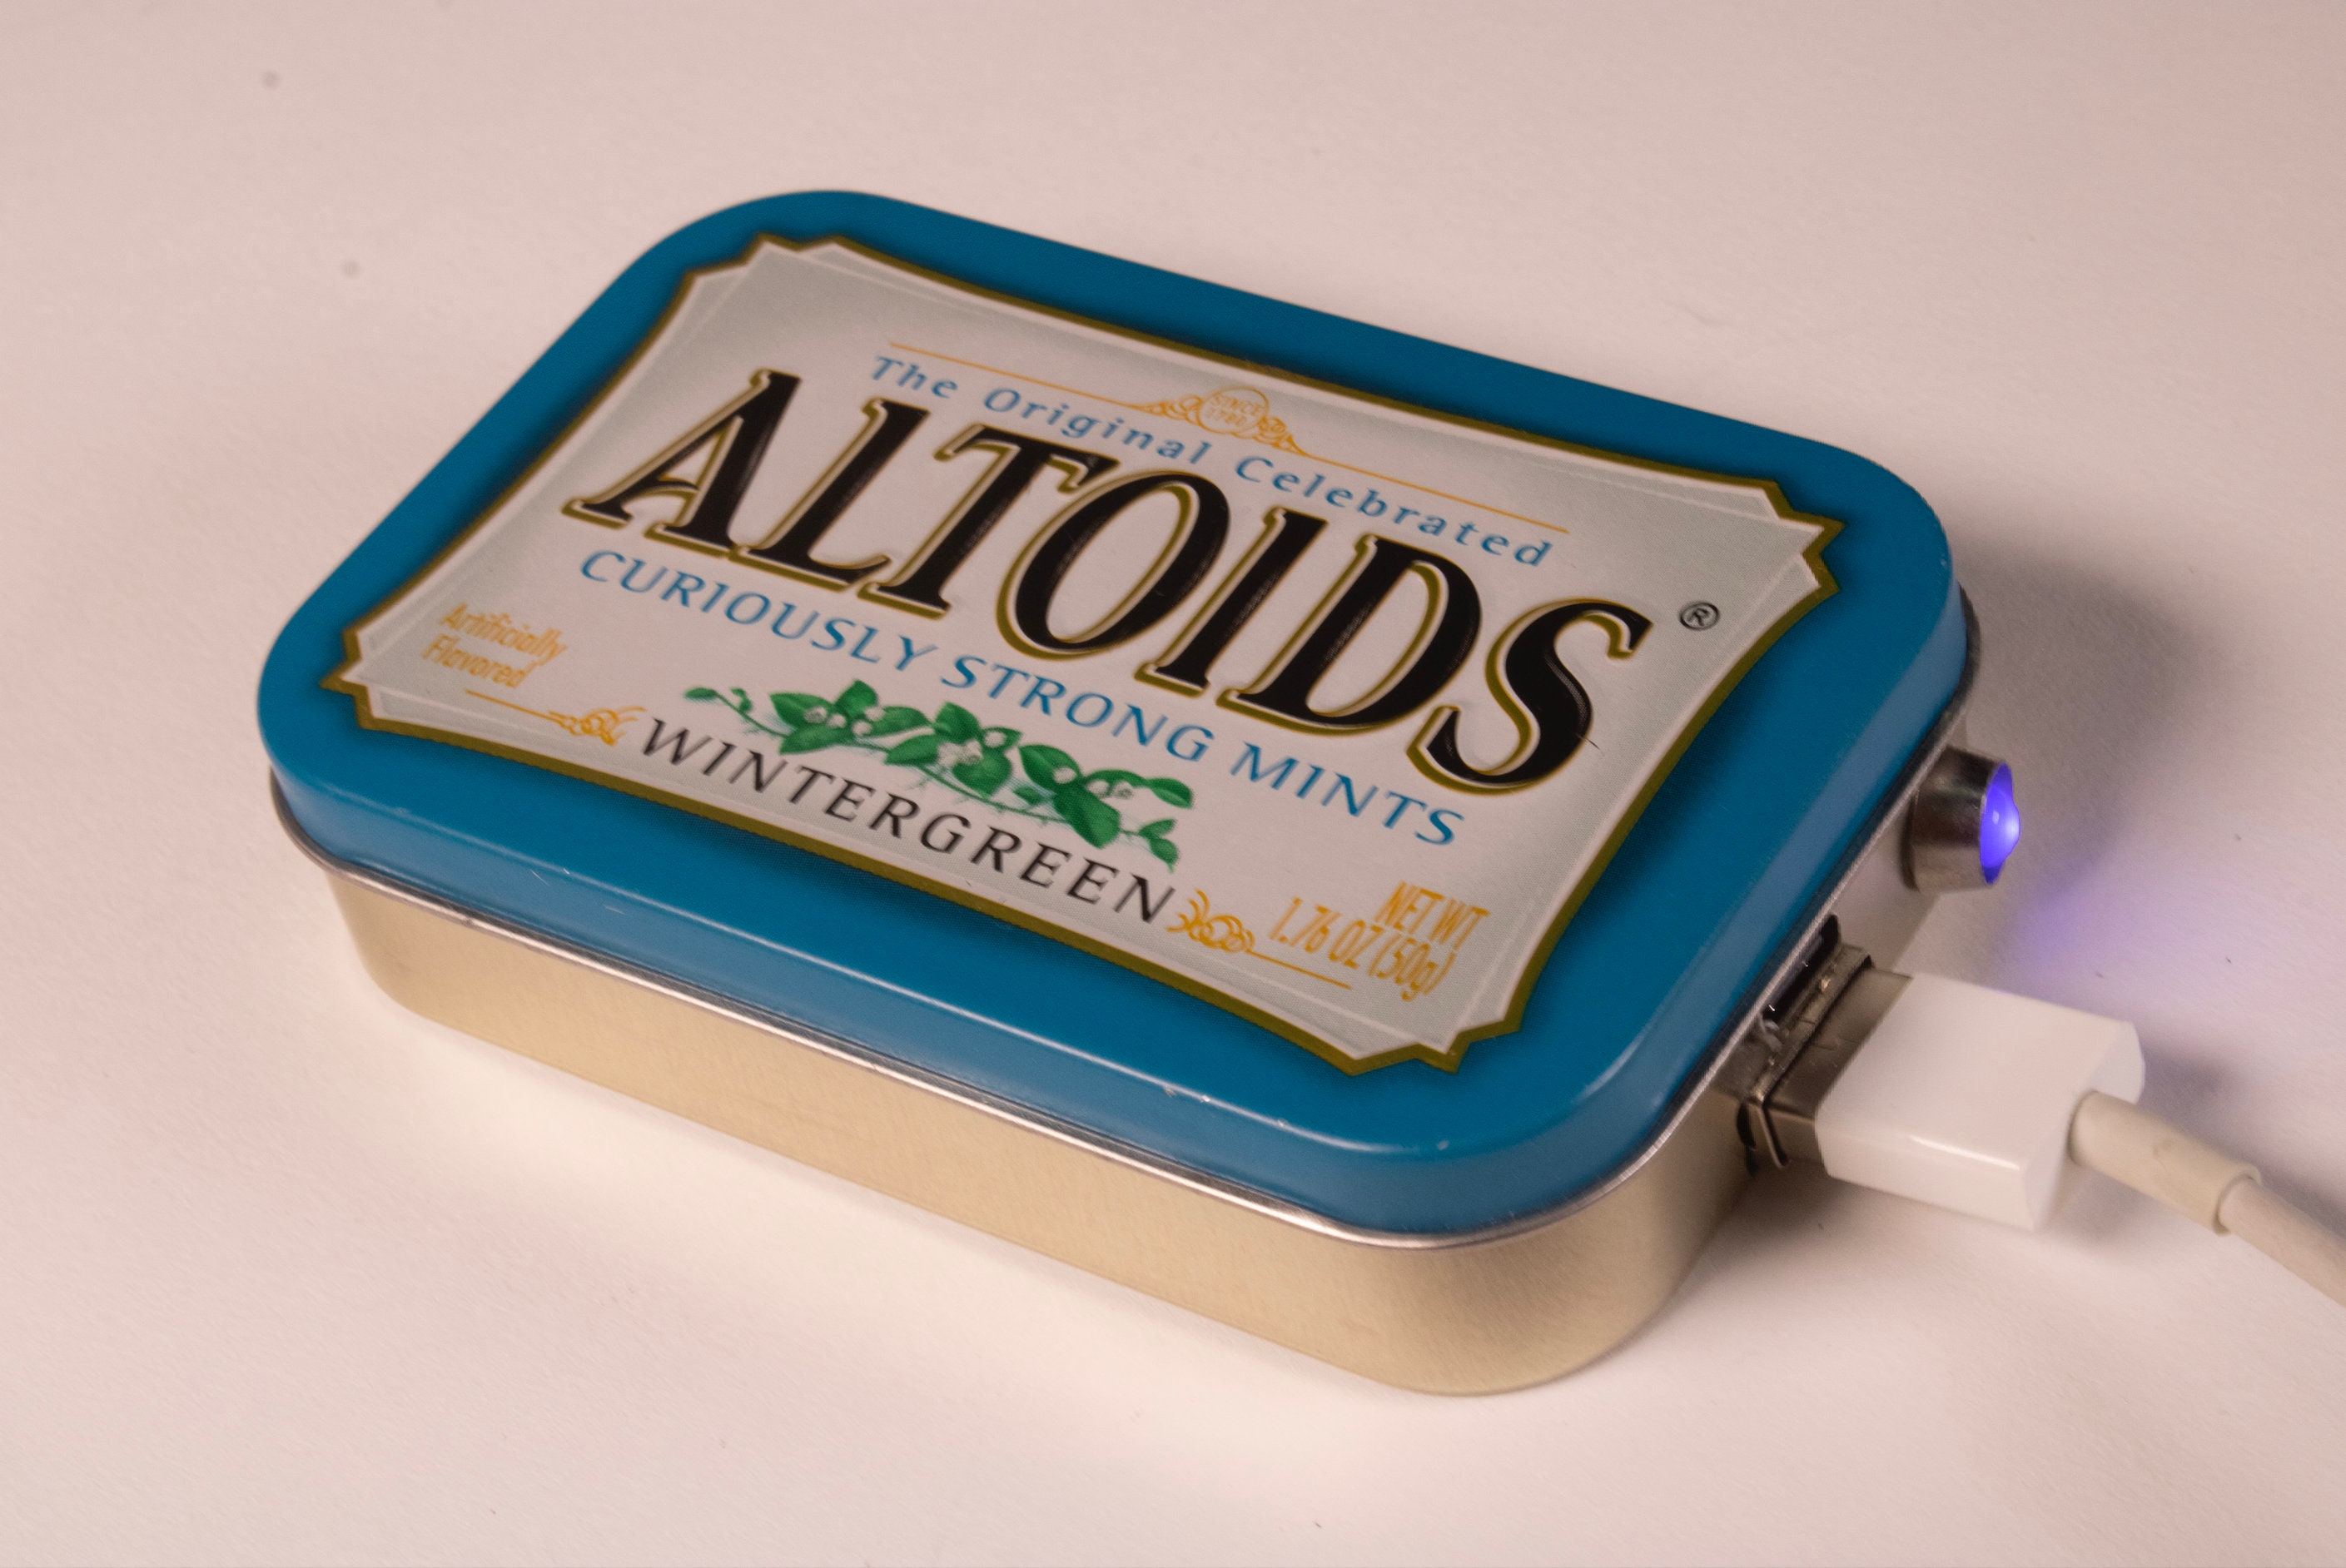 Portable Altoids Tin Charger wintergreen 6000mah Portable Power Bank for  Smartphones, Airpods, Mobile Phone Charger, Travel Gifts -  Sweden